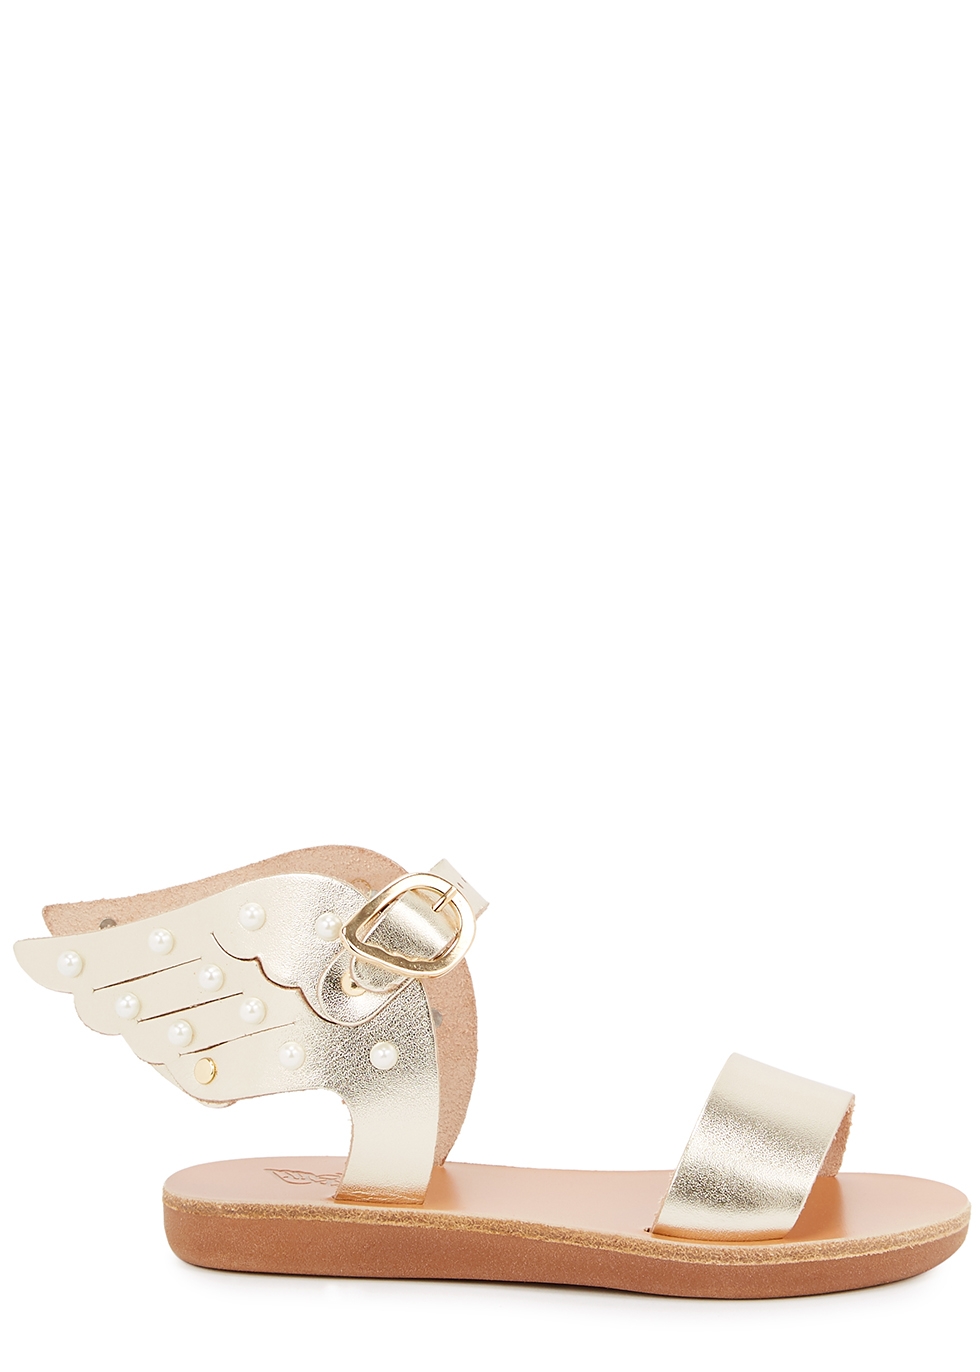 KIDS Little Ikaria gold leather sandals